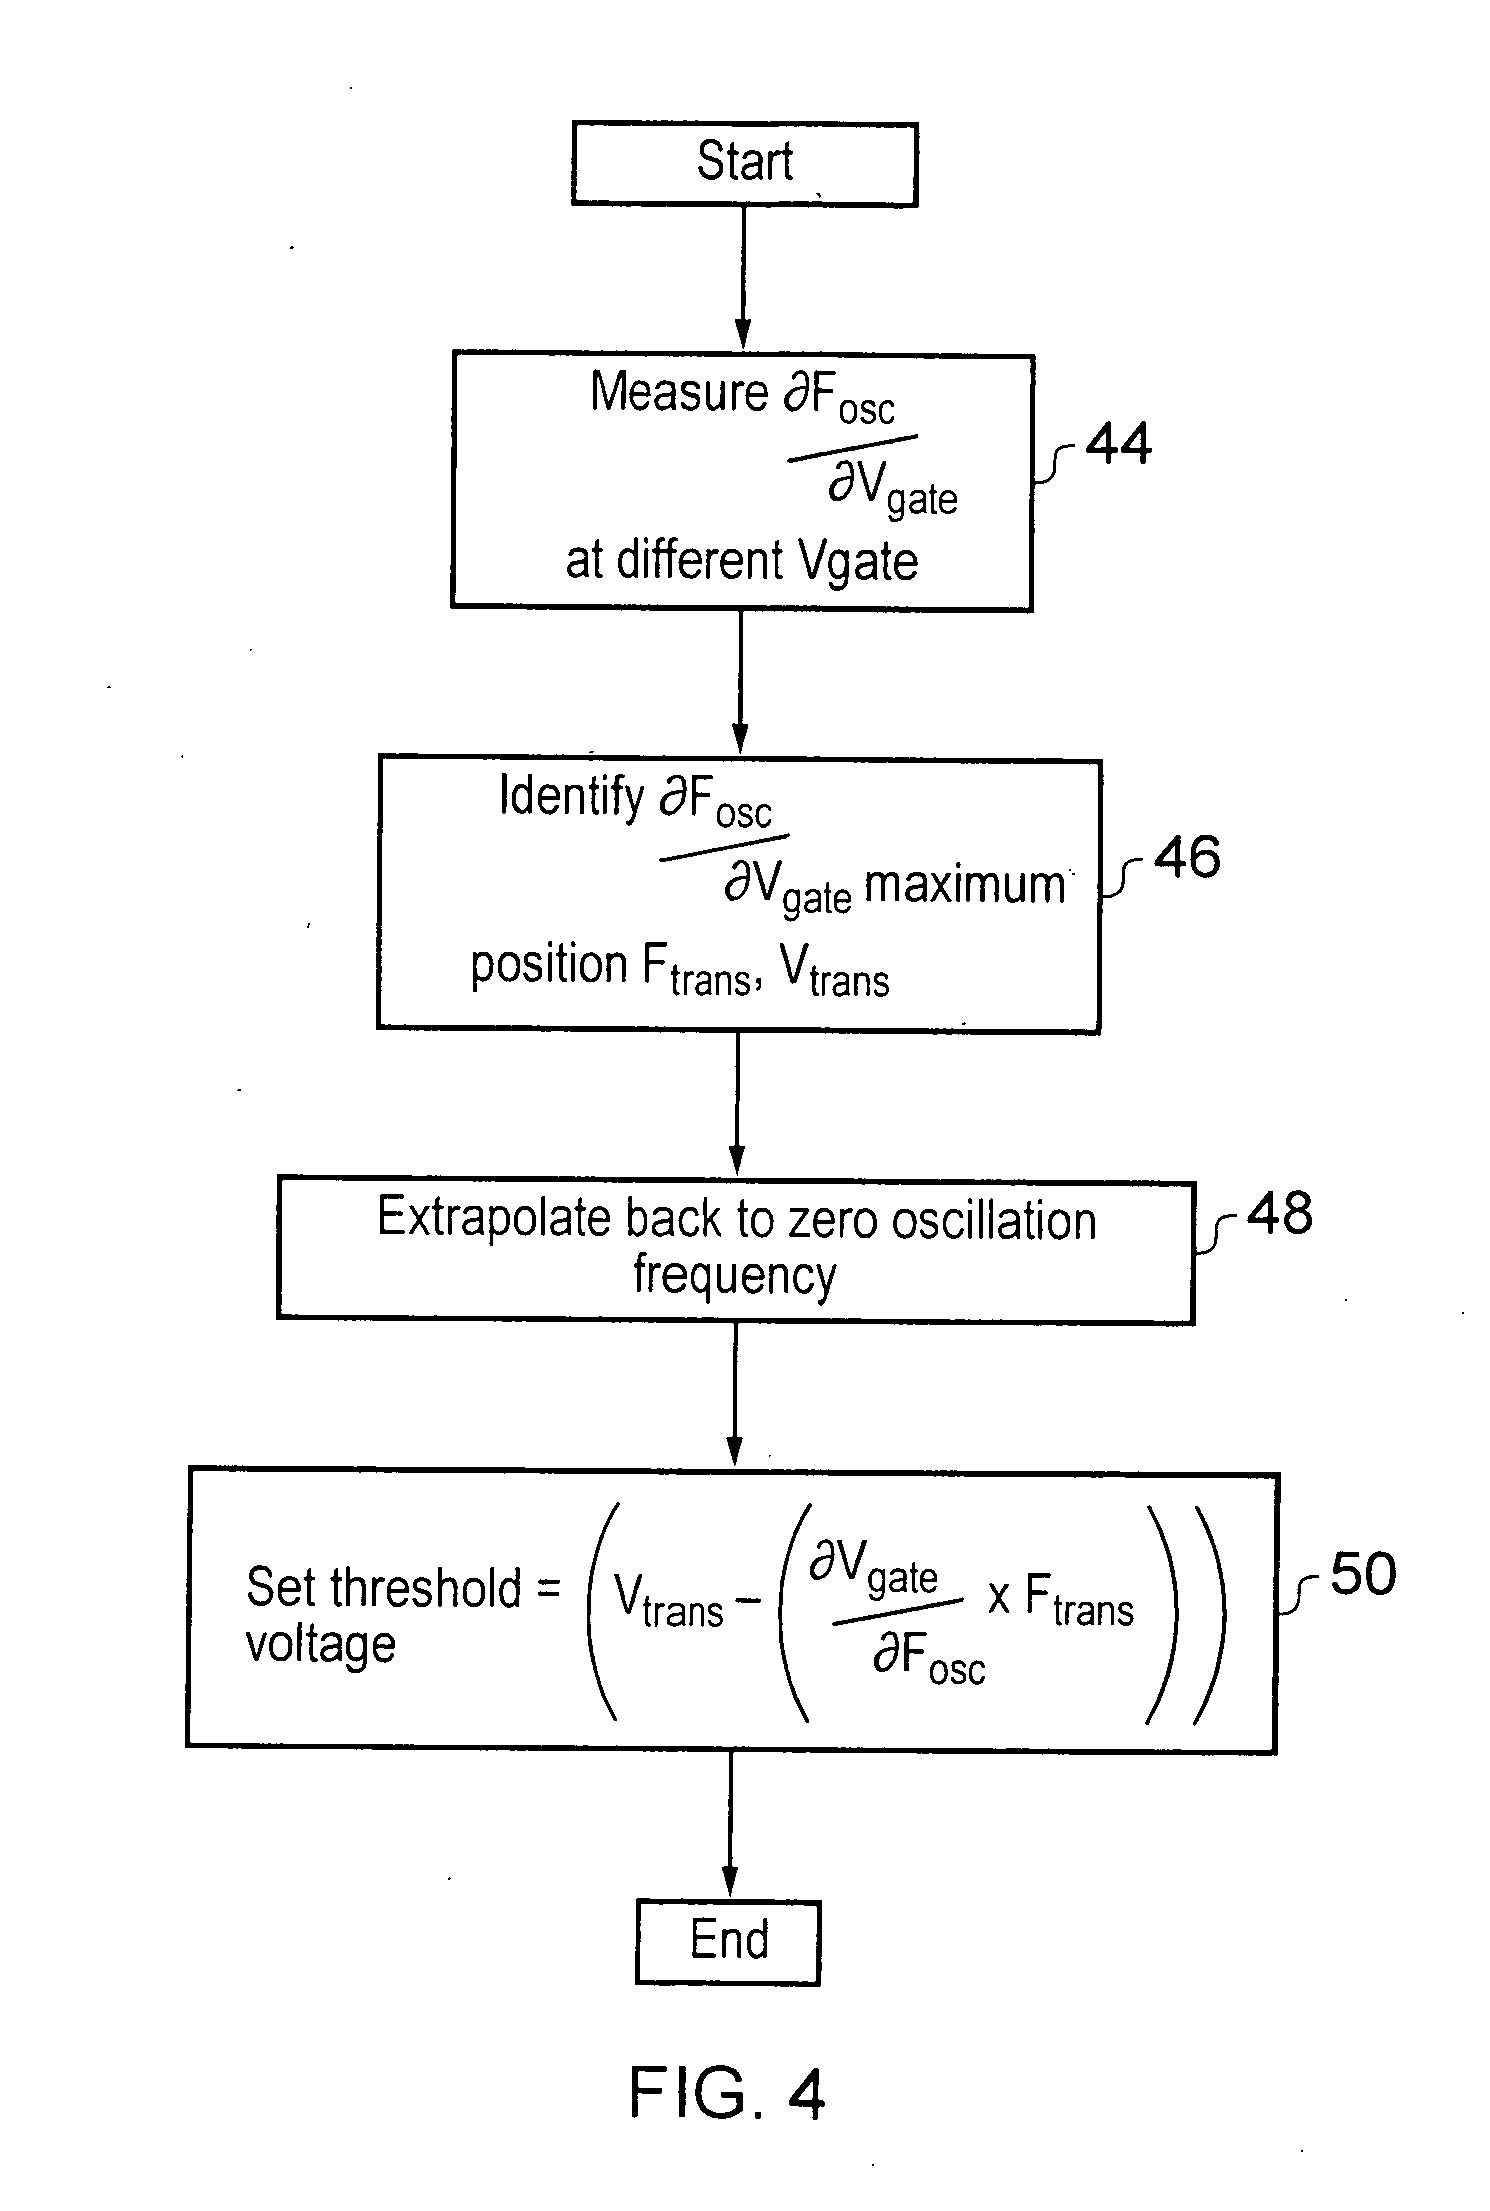 Operating parameter monitor for an integrated circuit